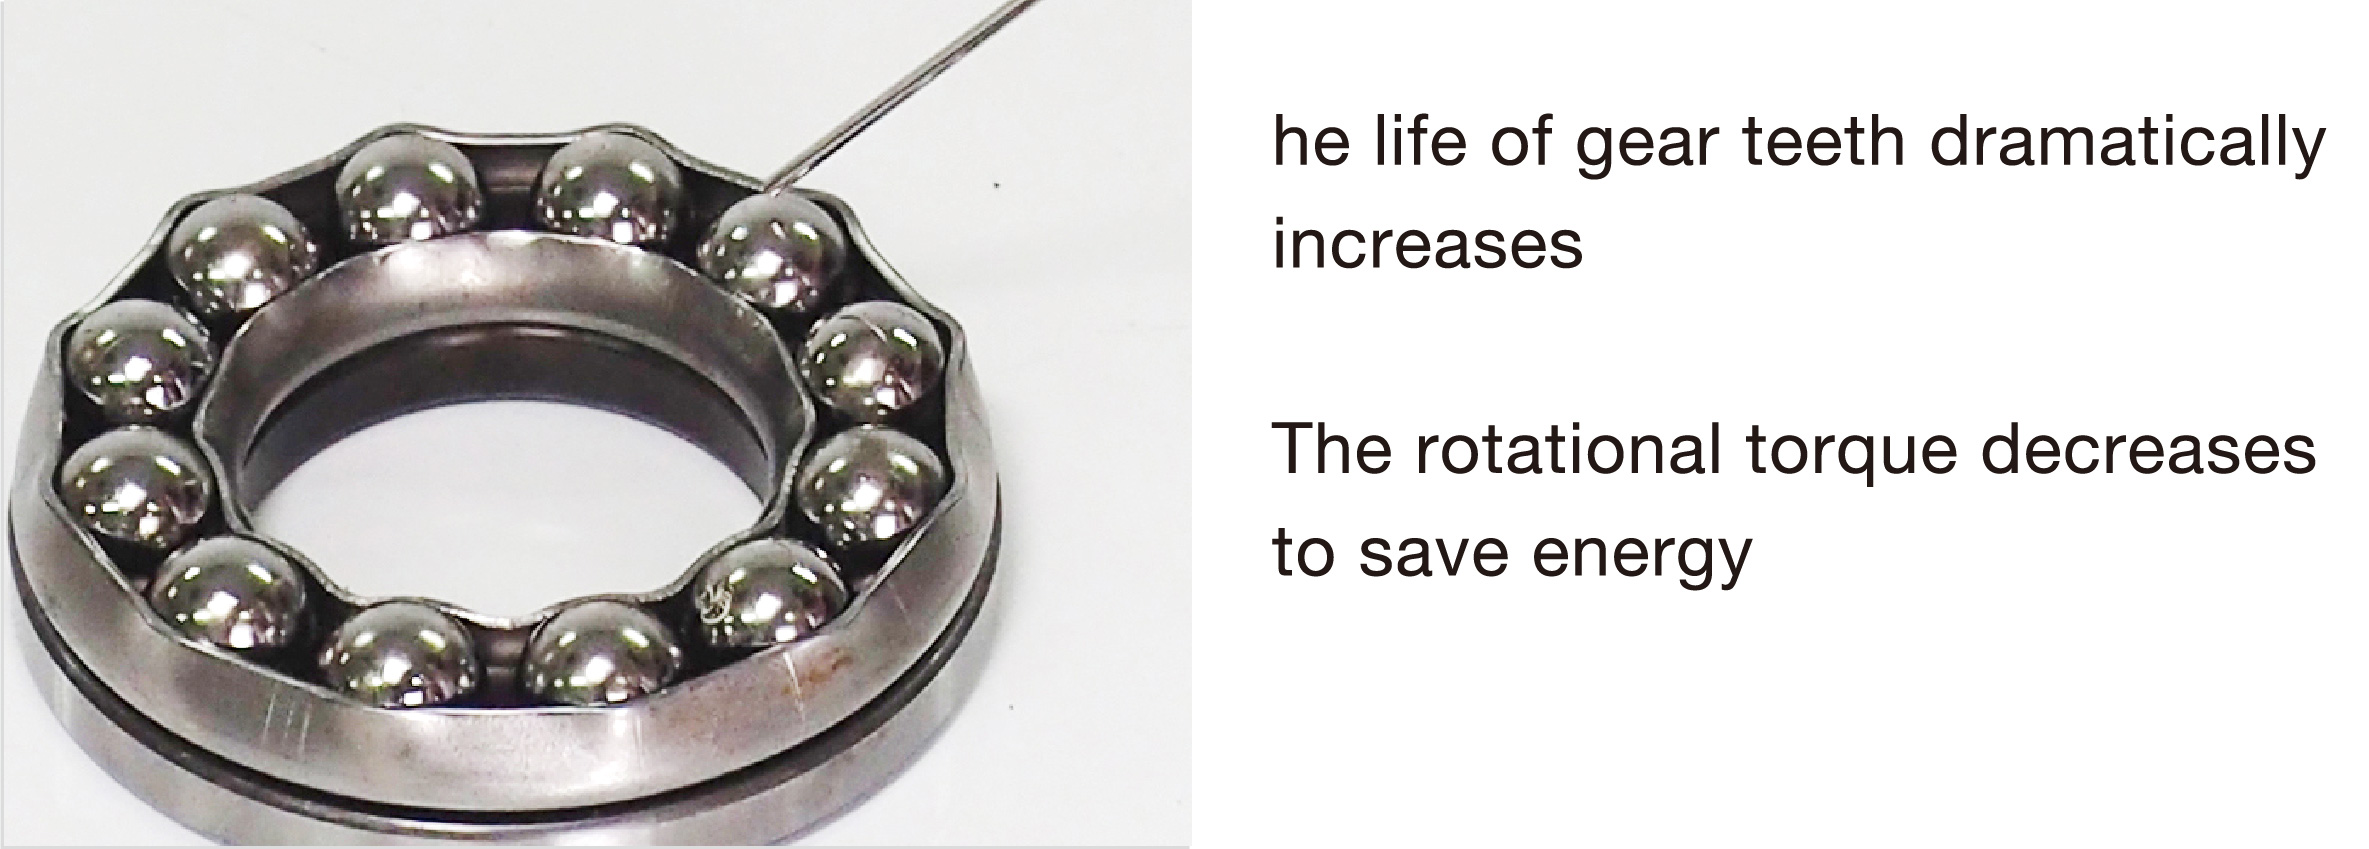 The life of bearings dramatically increases. The rotational torque decreases to save energy.